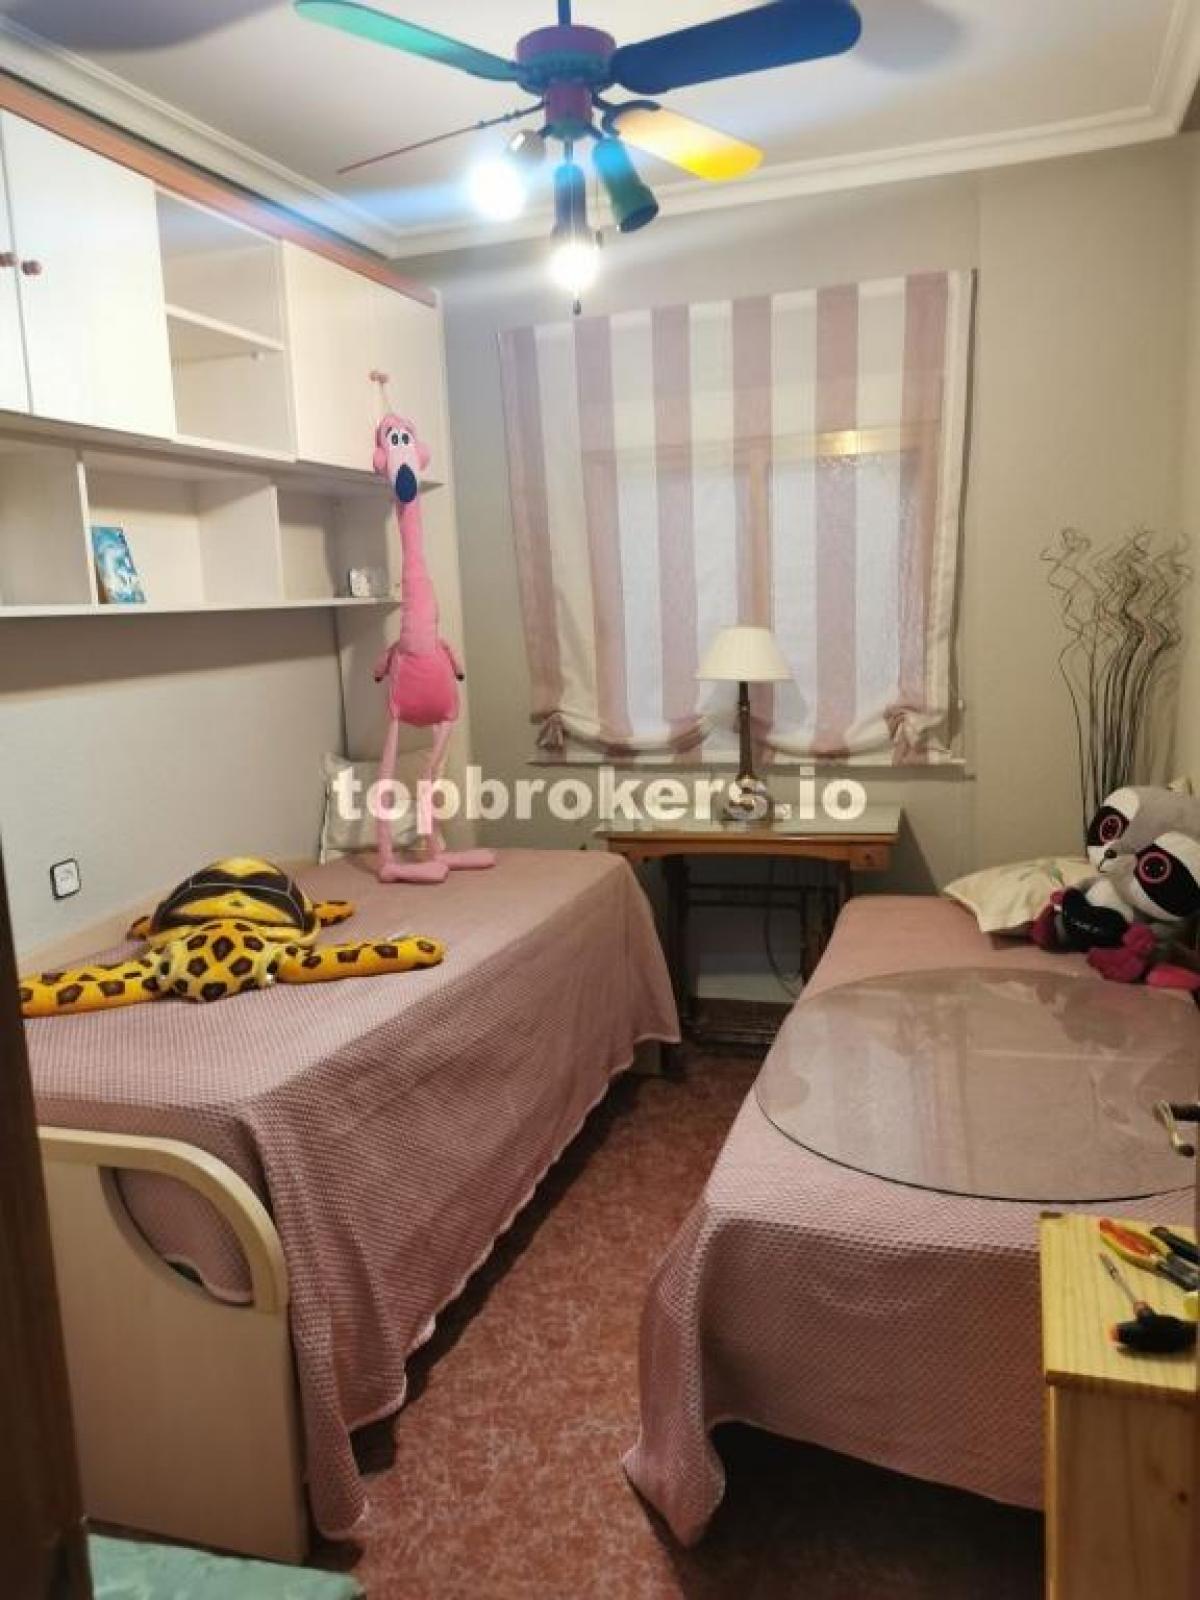 Picture of Apartment For Sale in Linares, Asturias, Spain